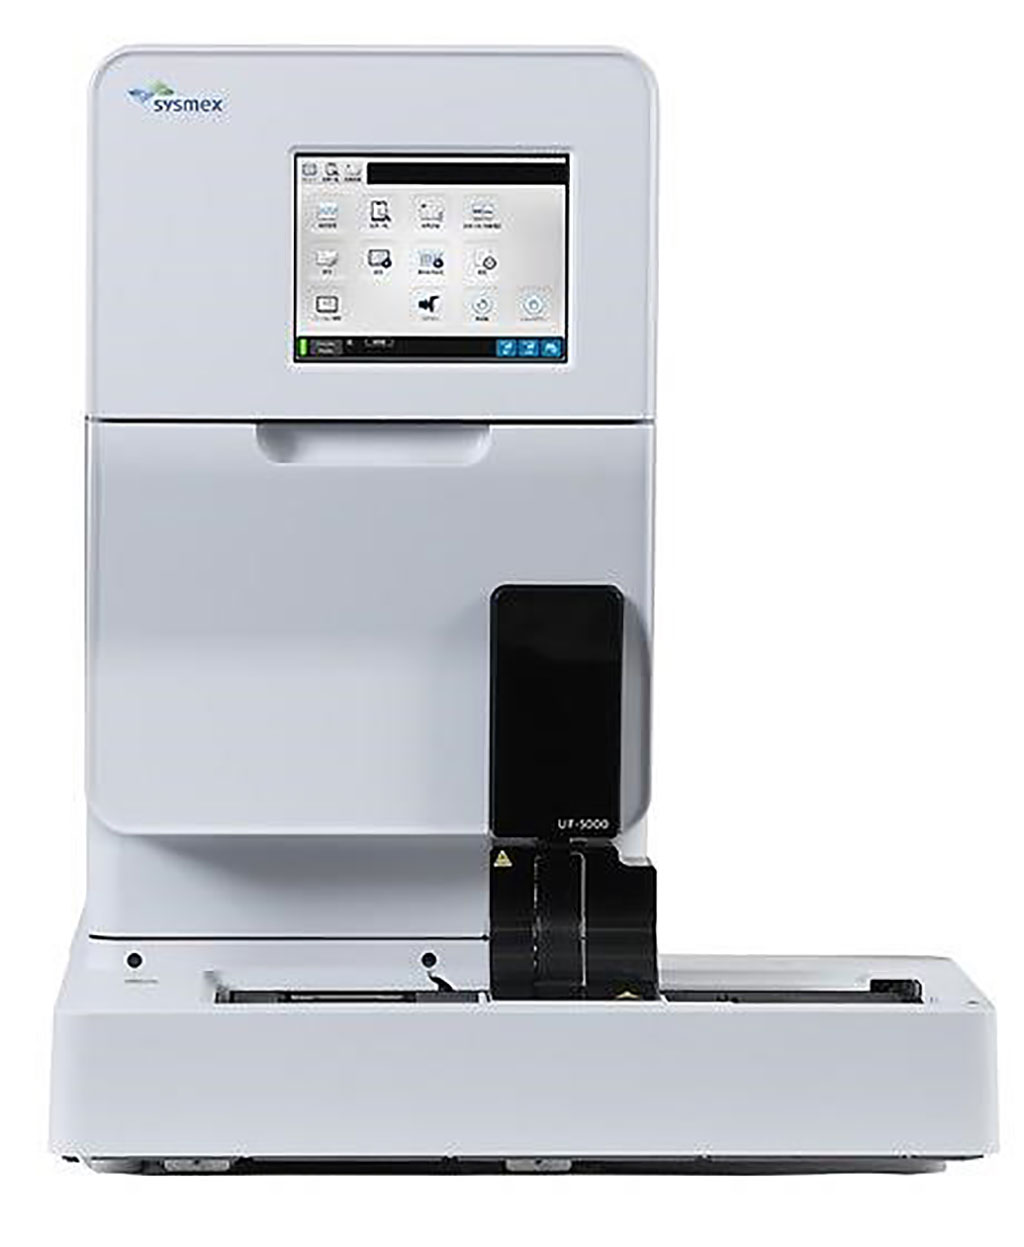 Image: The UF-5000 fully automated flow cytometer based on renowned fluorescence flow cytometry (FFC), represents the latest in urinalysis technology (Photo courtesy of Sysmex Corporation).